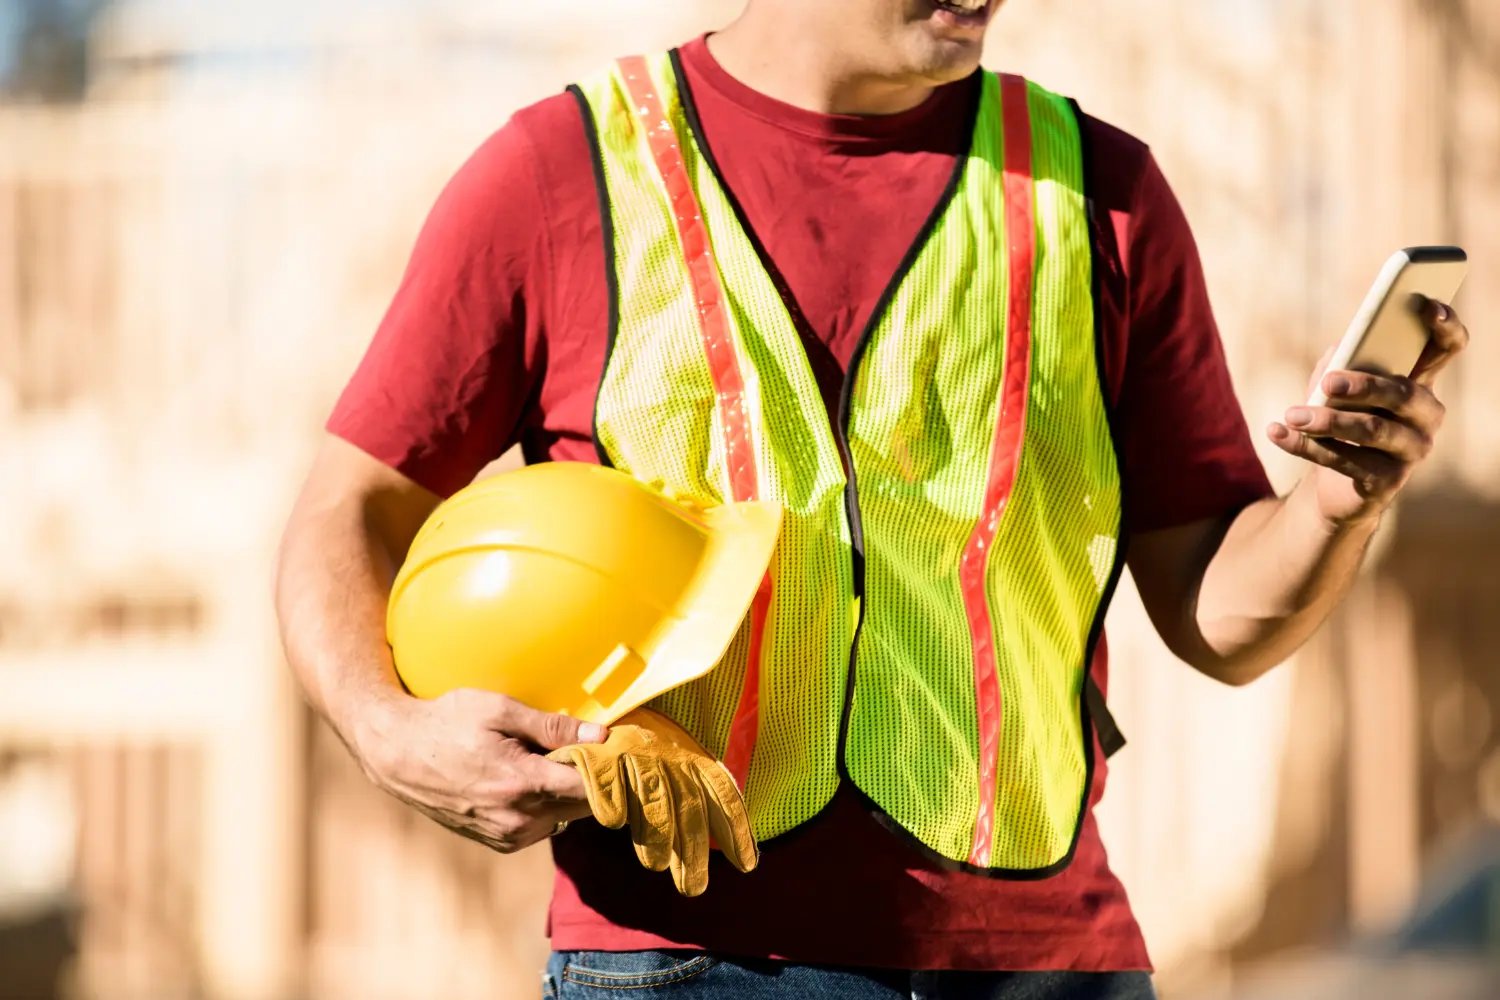 Construction worker on phone using TextHive